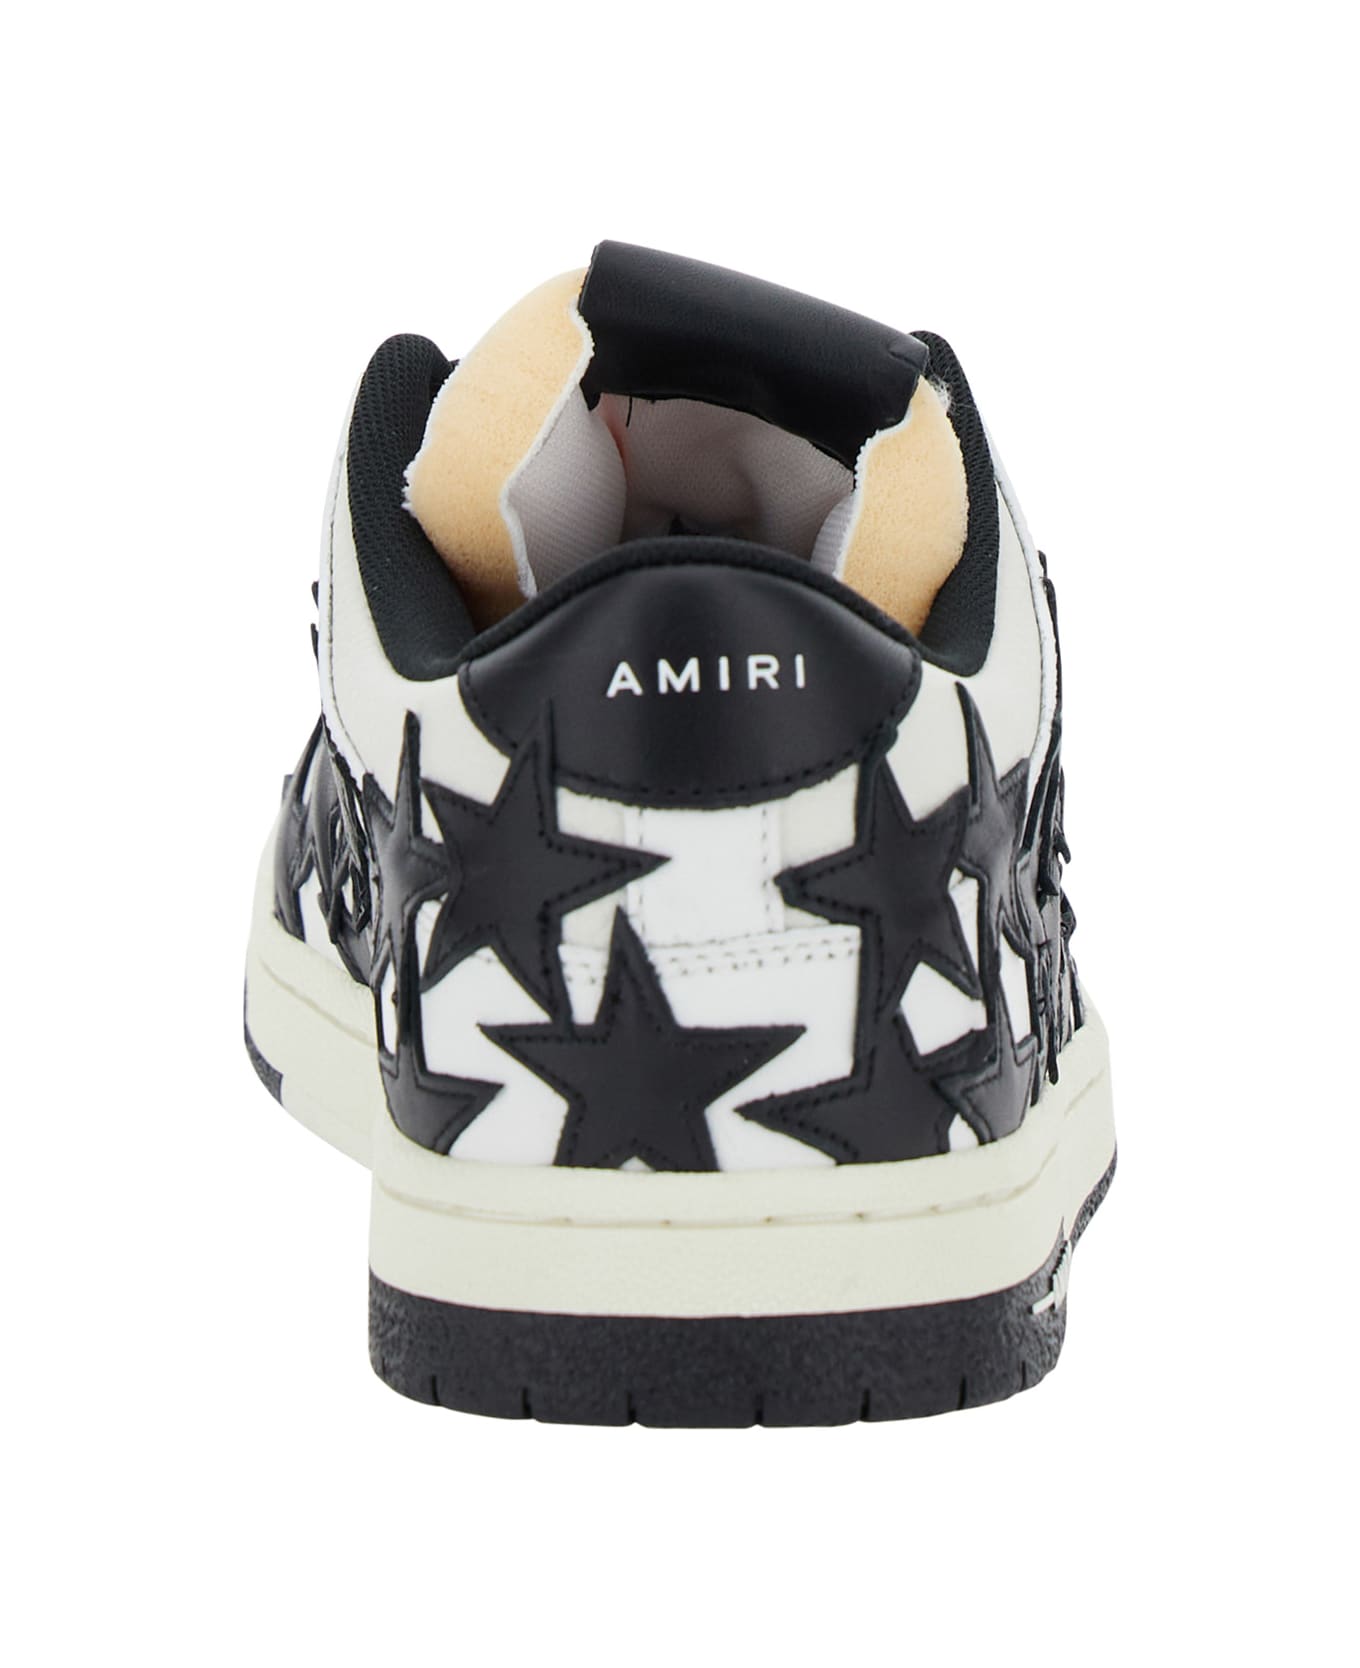 AMIRI Black And White Low Top Sneakers With Stars In Leather Man - White